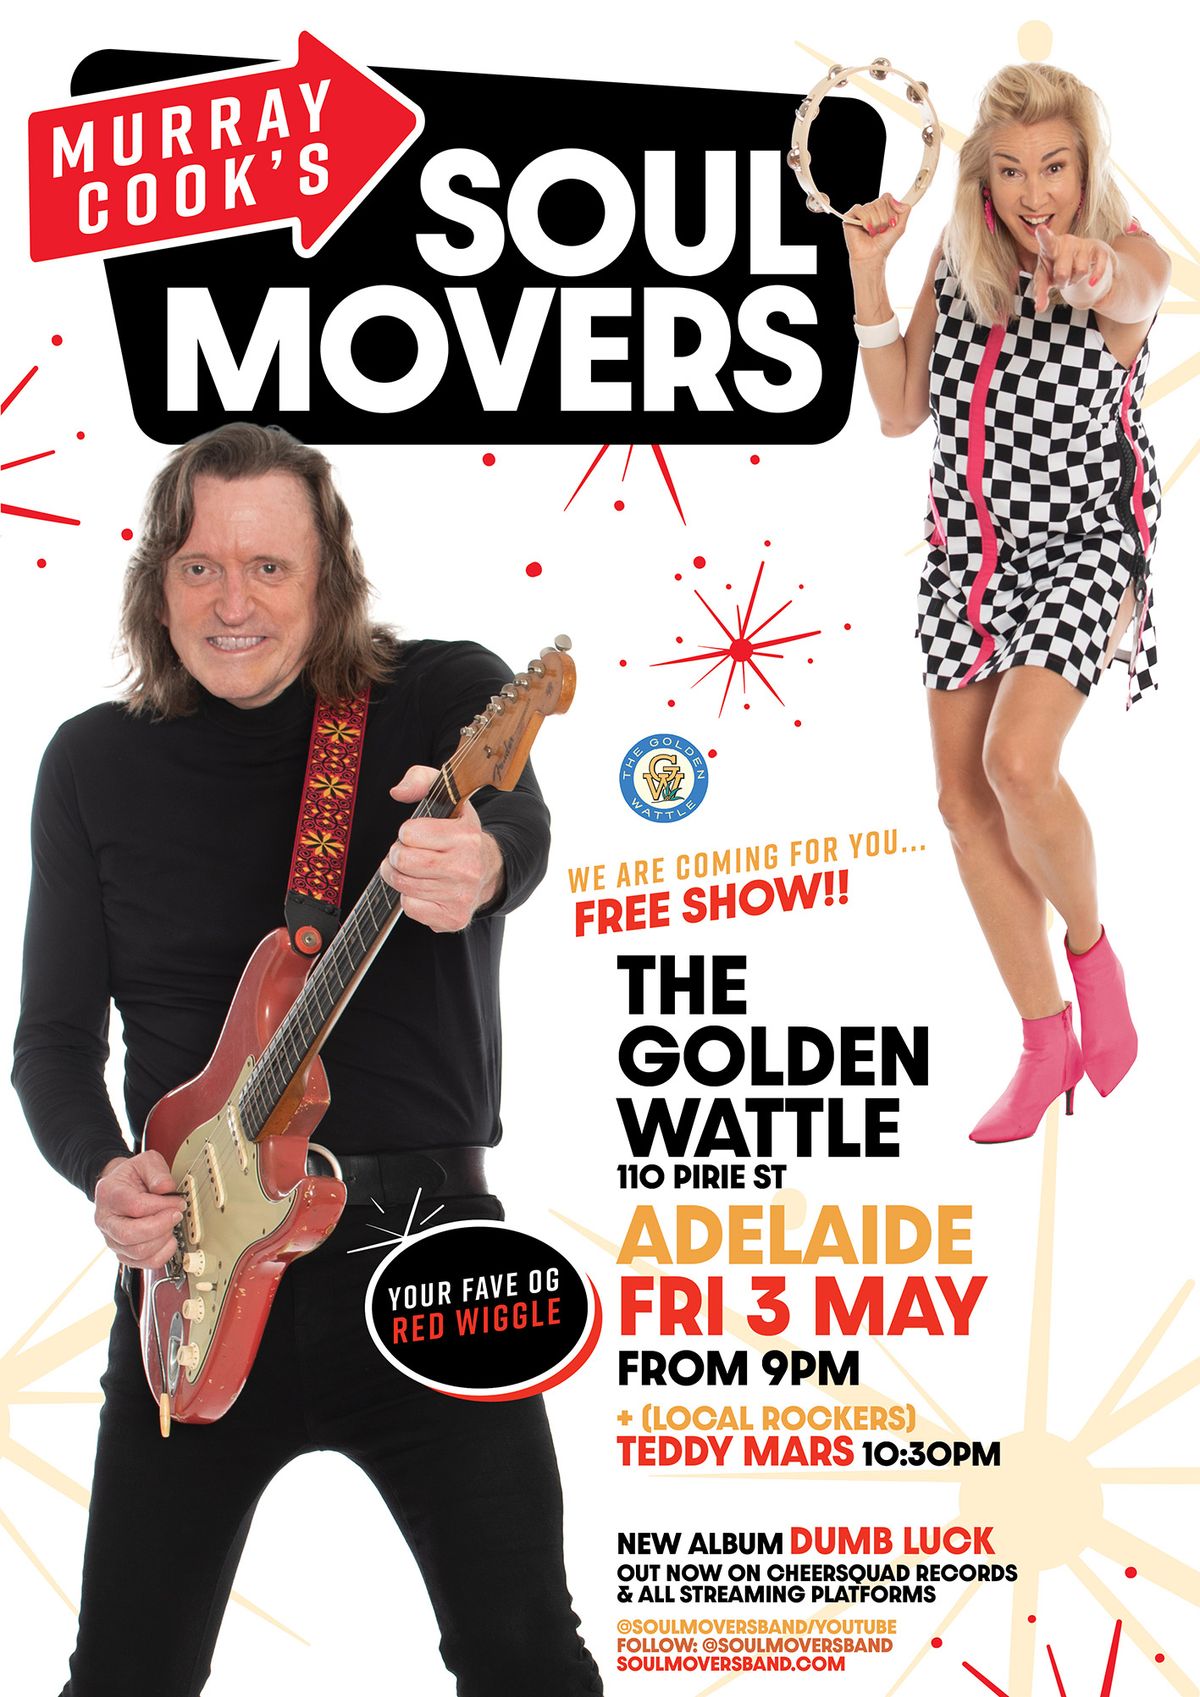 Murray Cook's Soul Movers + Teddy Mars Rock Adelaide